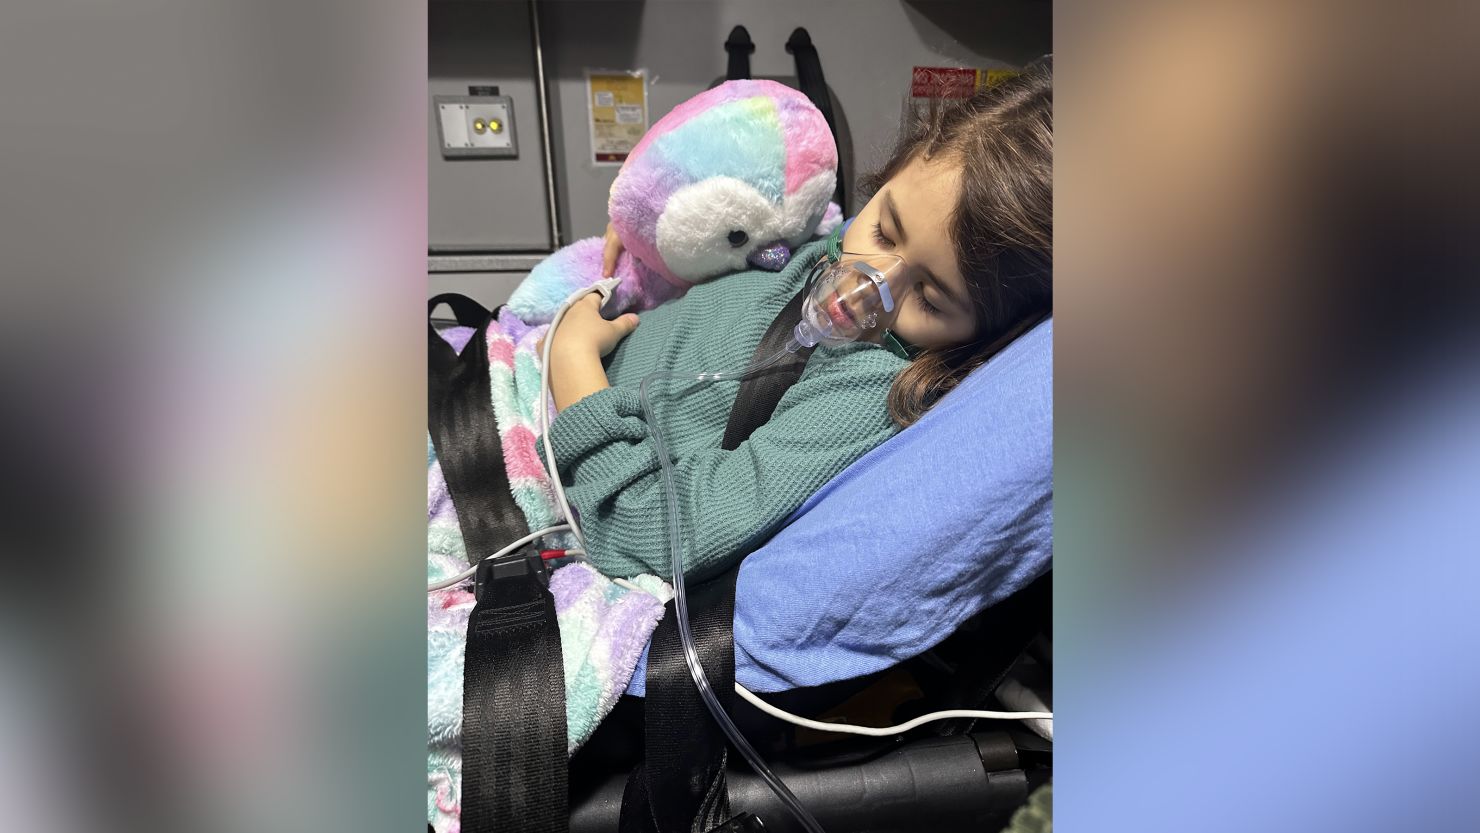 Effie Schnacky, 7, was transferred to a children's hospital for a higher level of care when she got pneumonia in February, alongside her companion Cotton Candy.